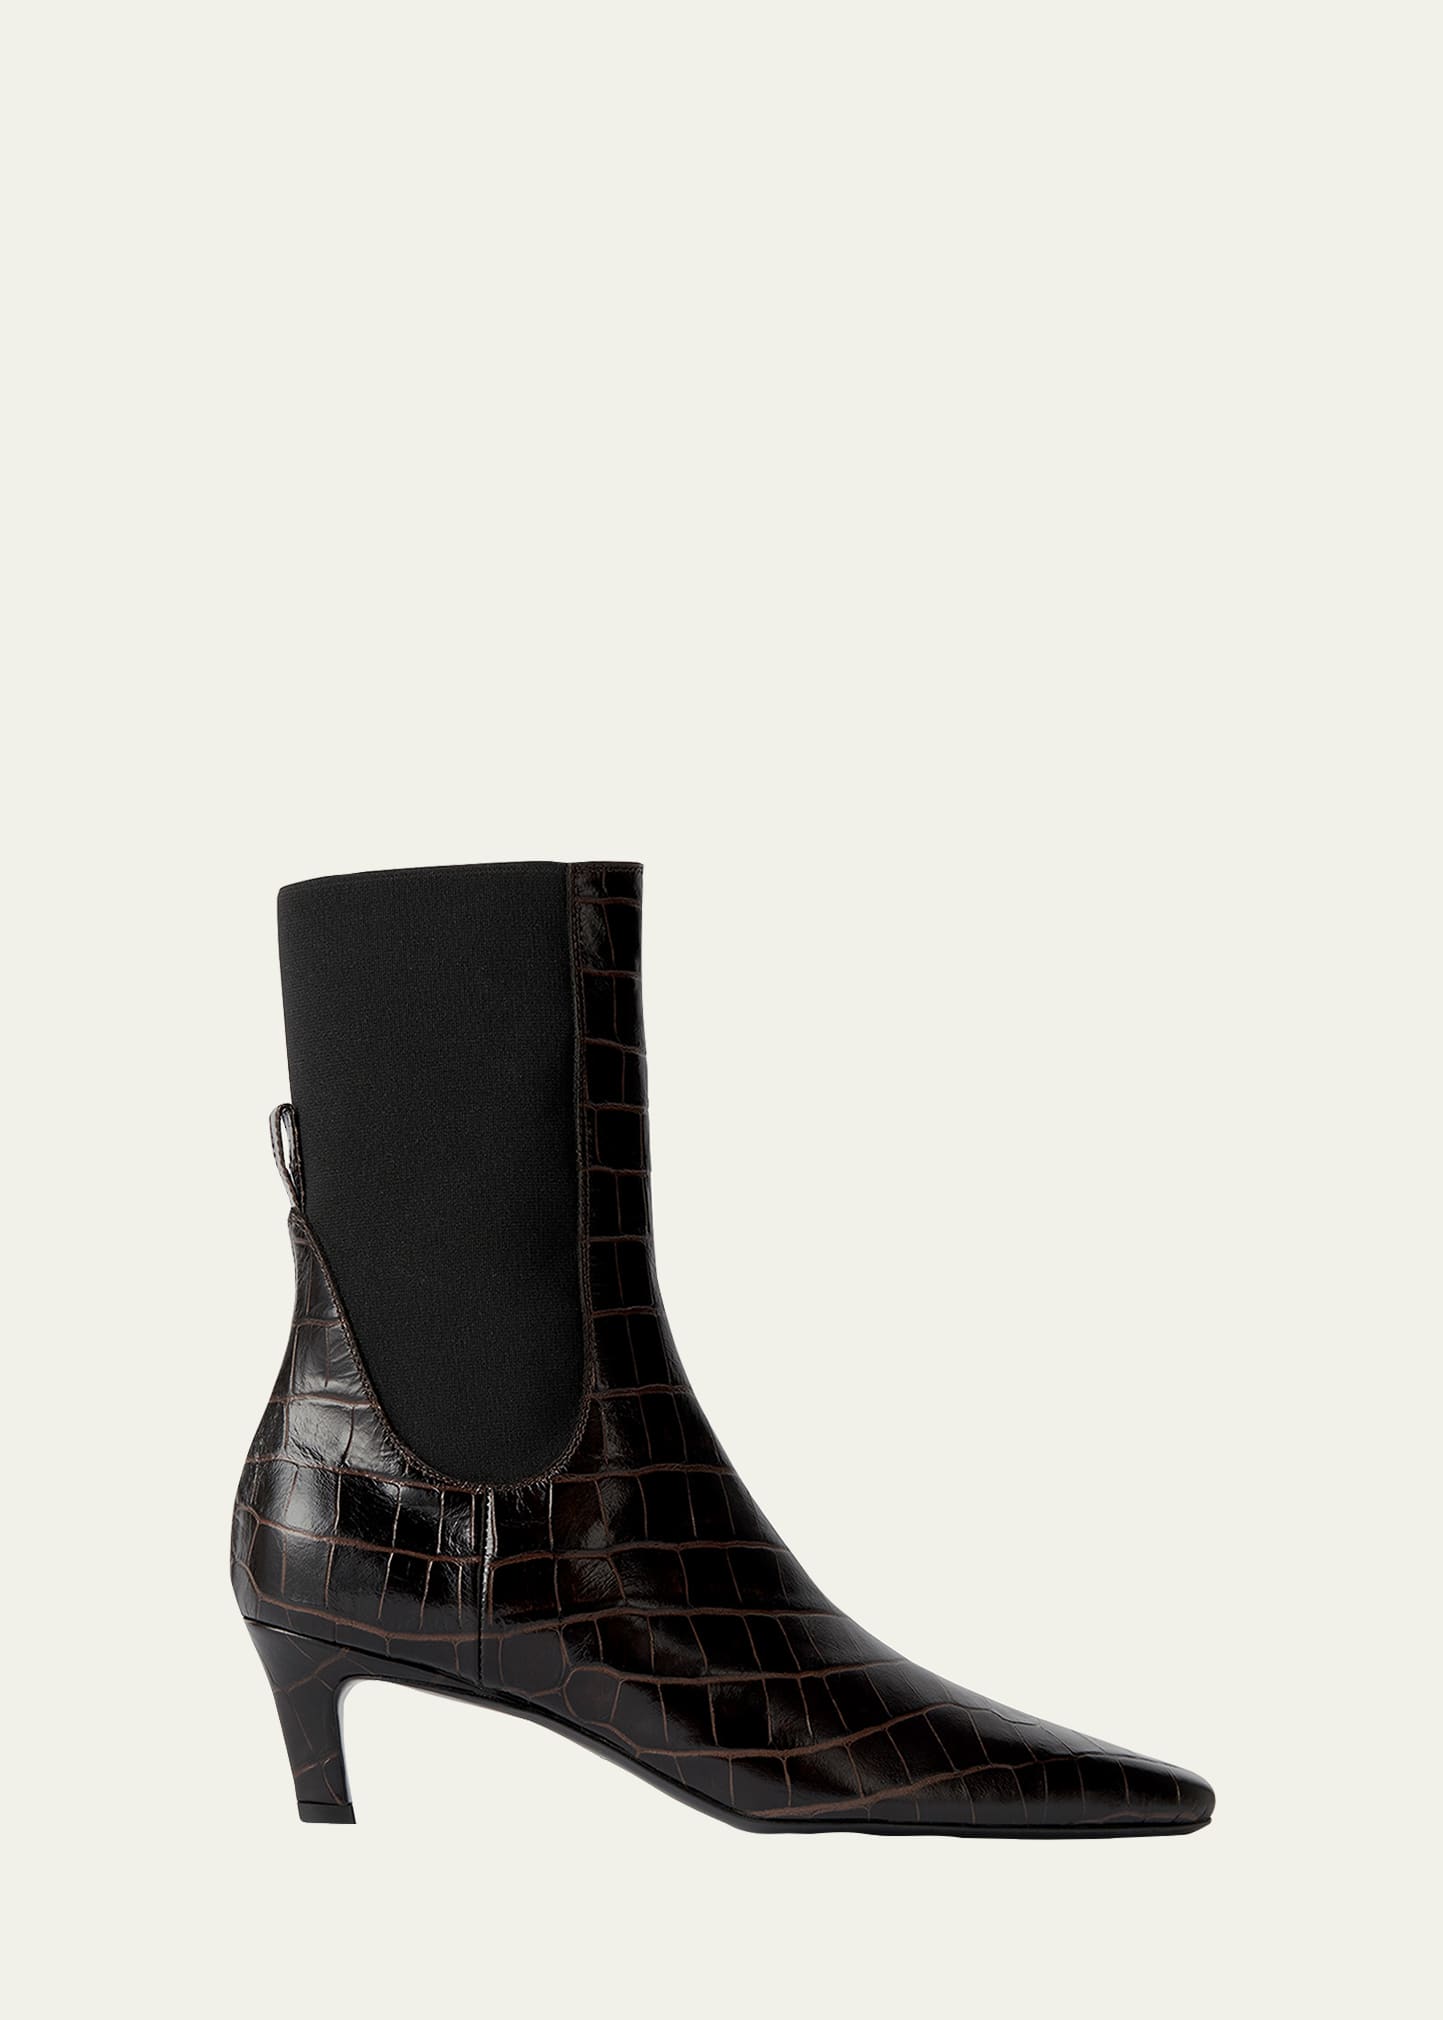 Toteme The Mid Heel Calfskin Ankle Boots | Bergdorf Goodman